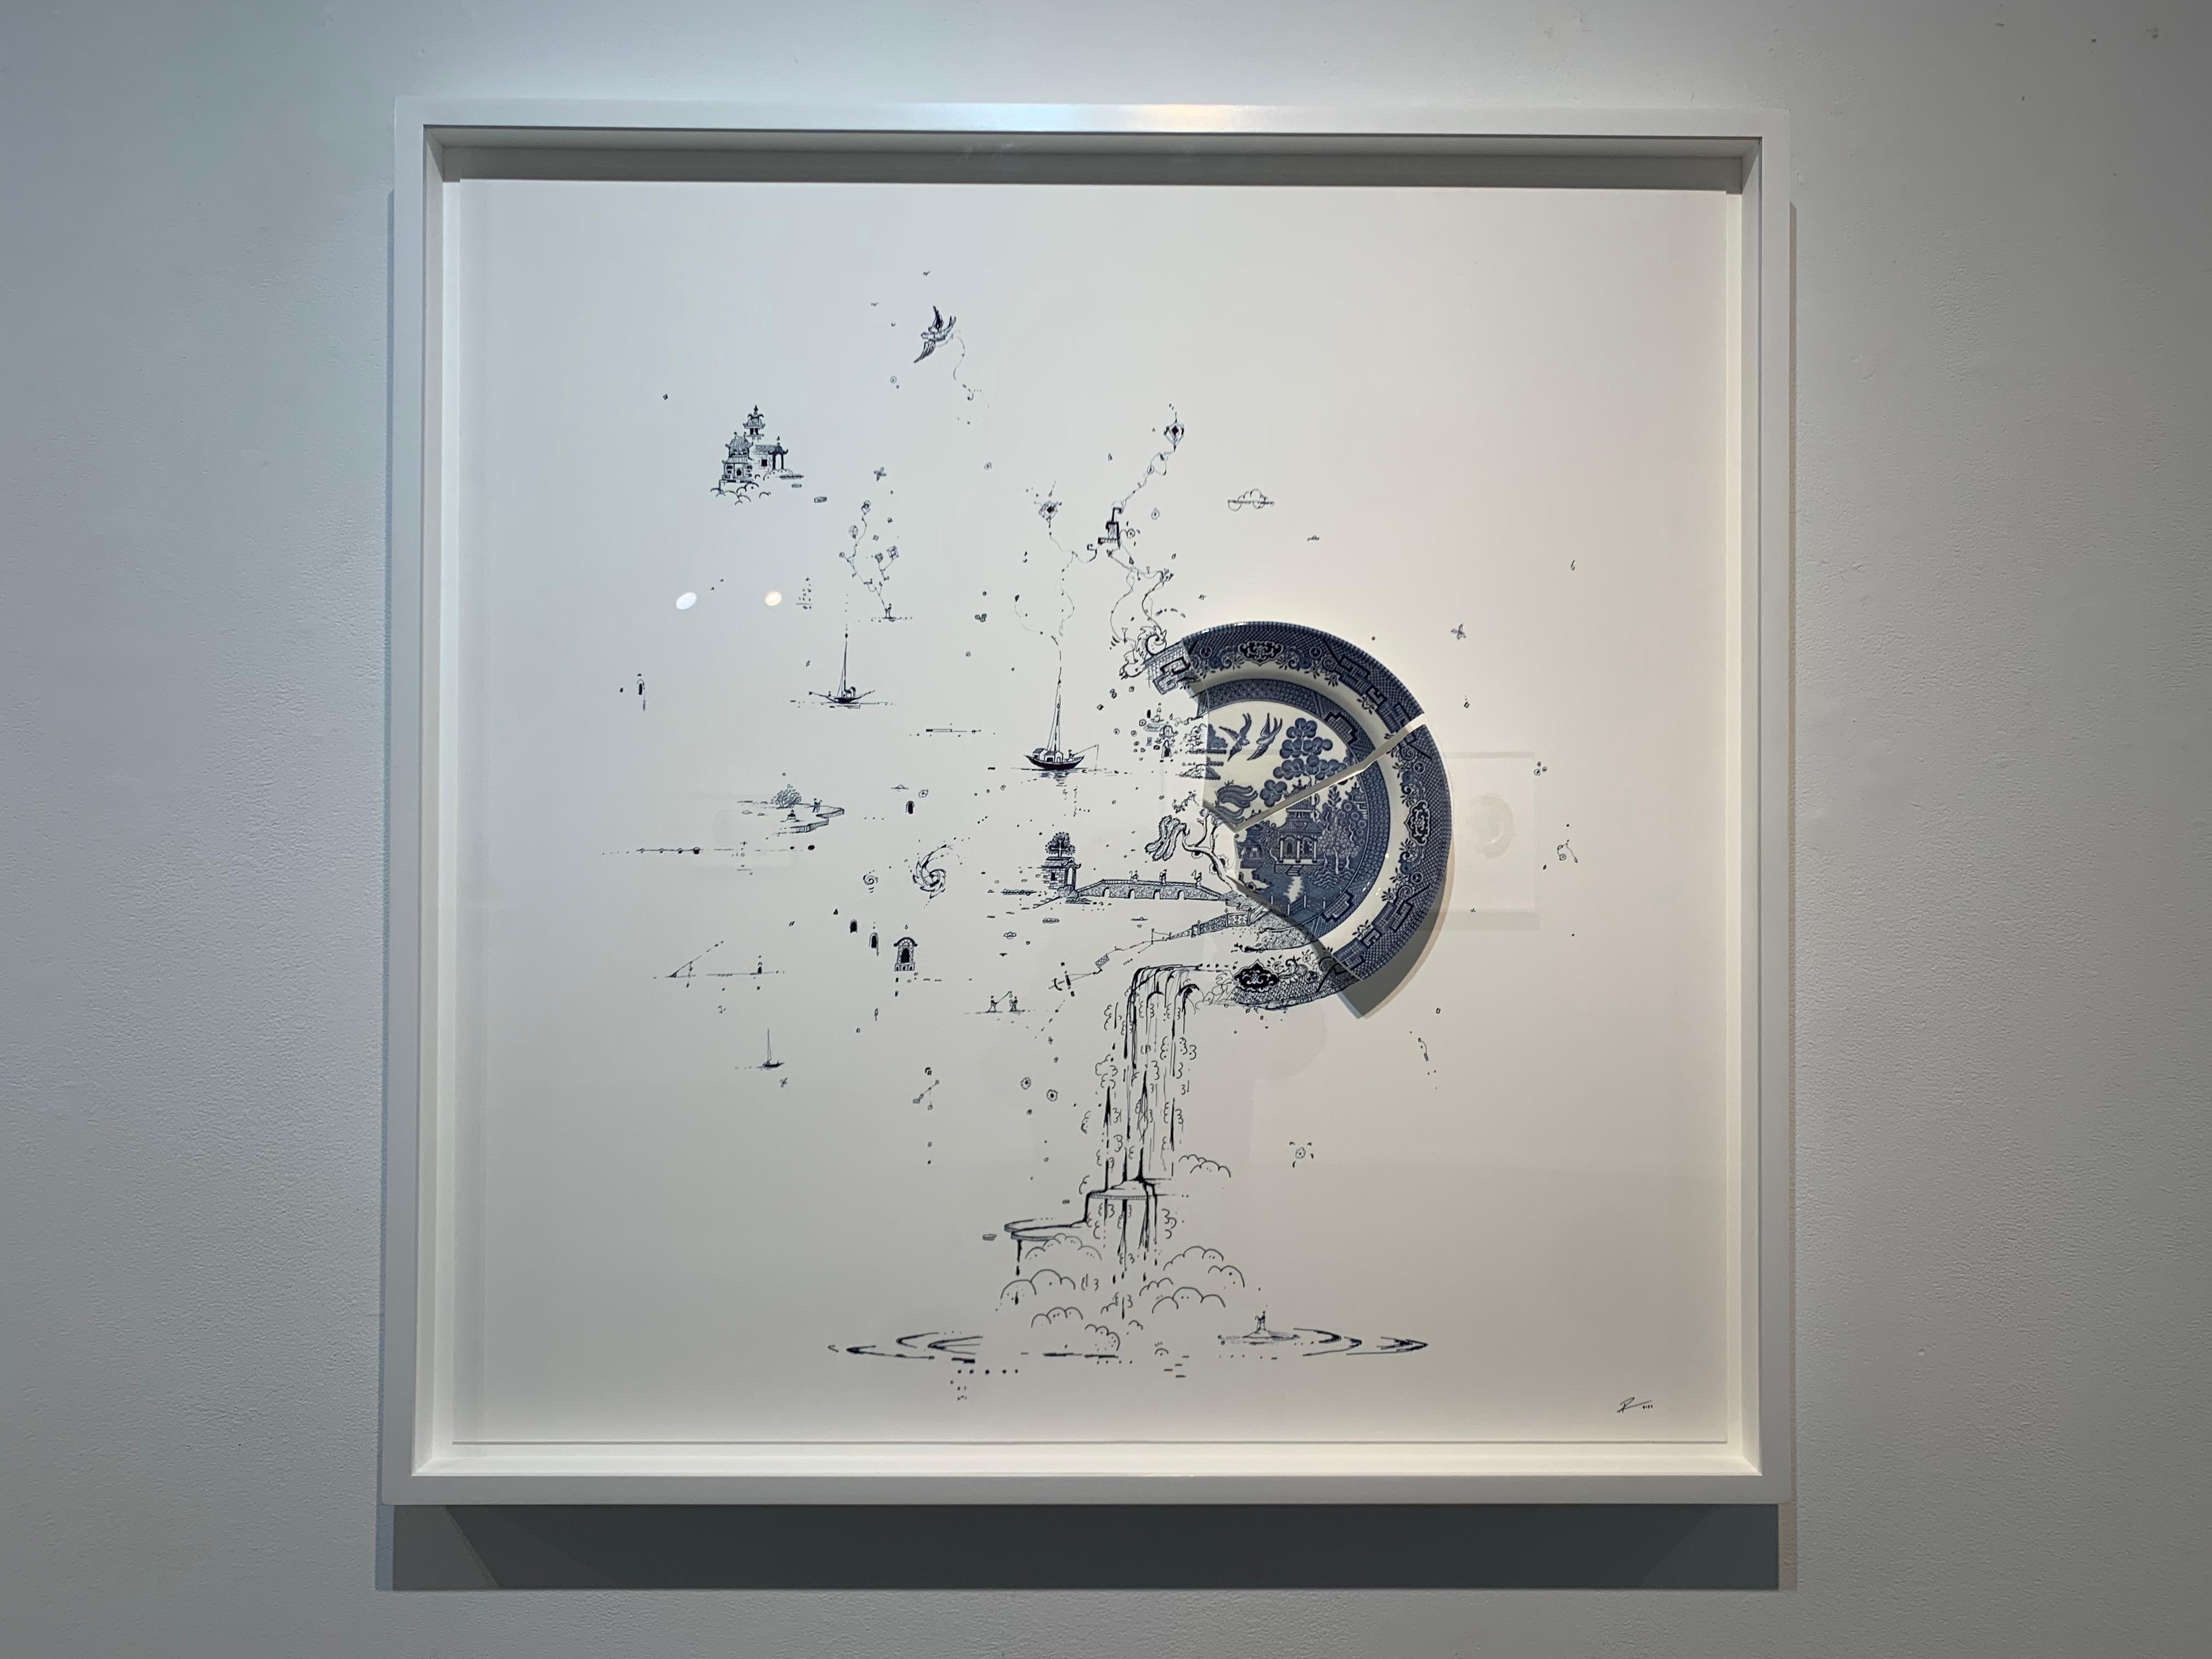 Robert Strati is an American artist who creates multimedia artworks using broken plates. His recent series “Fragmented” started when he accidentally dropped and broke a porcelain plate. The plate being inherited from his wife’s mother, Strati and